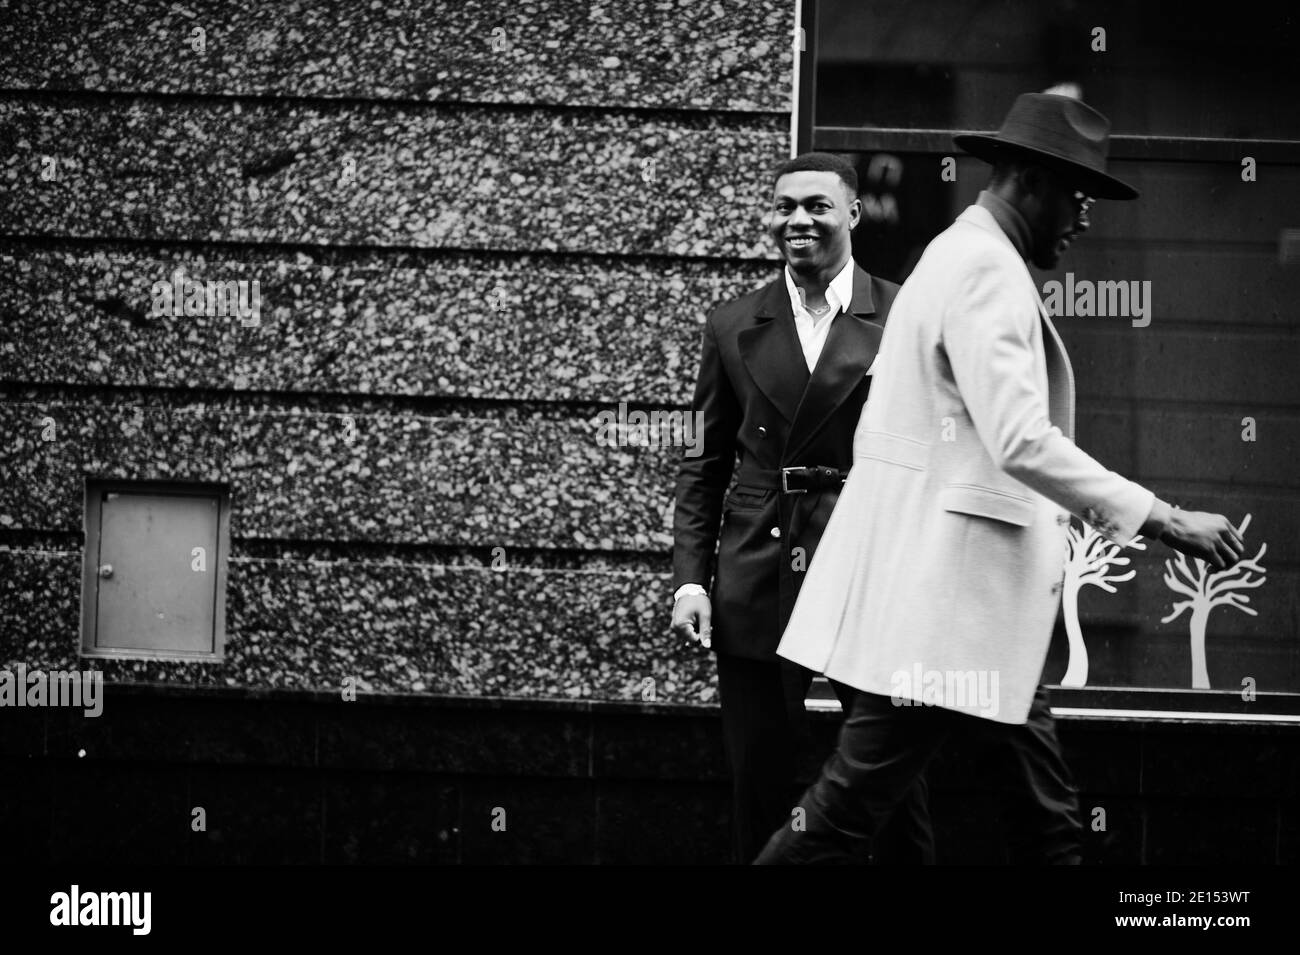 Two fashion black men walking on street. Fashionable portrait of african american male models. Wear suit, coat and hat. Stock Photo